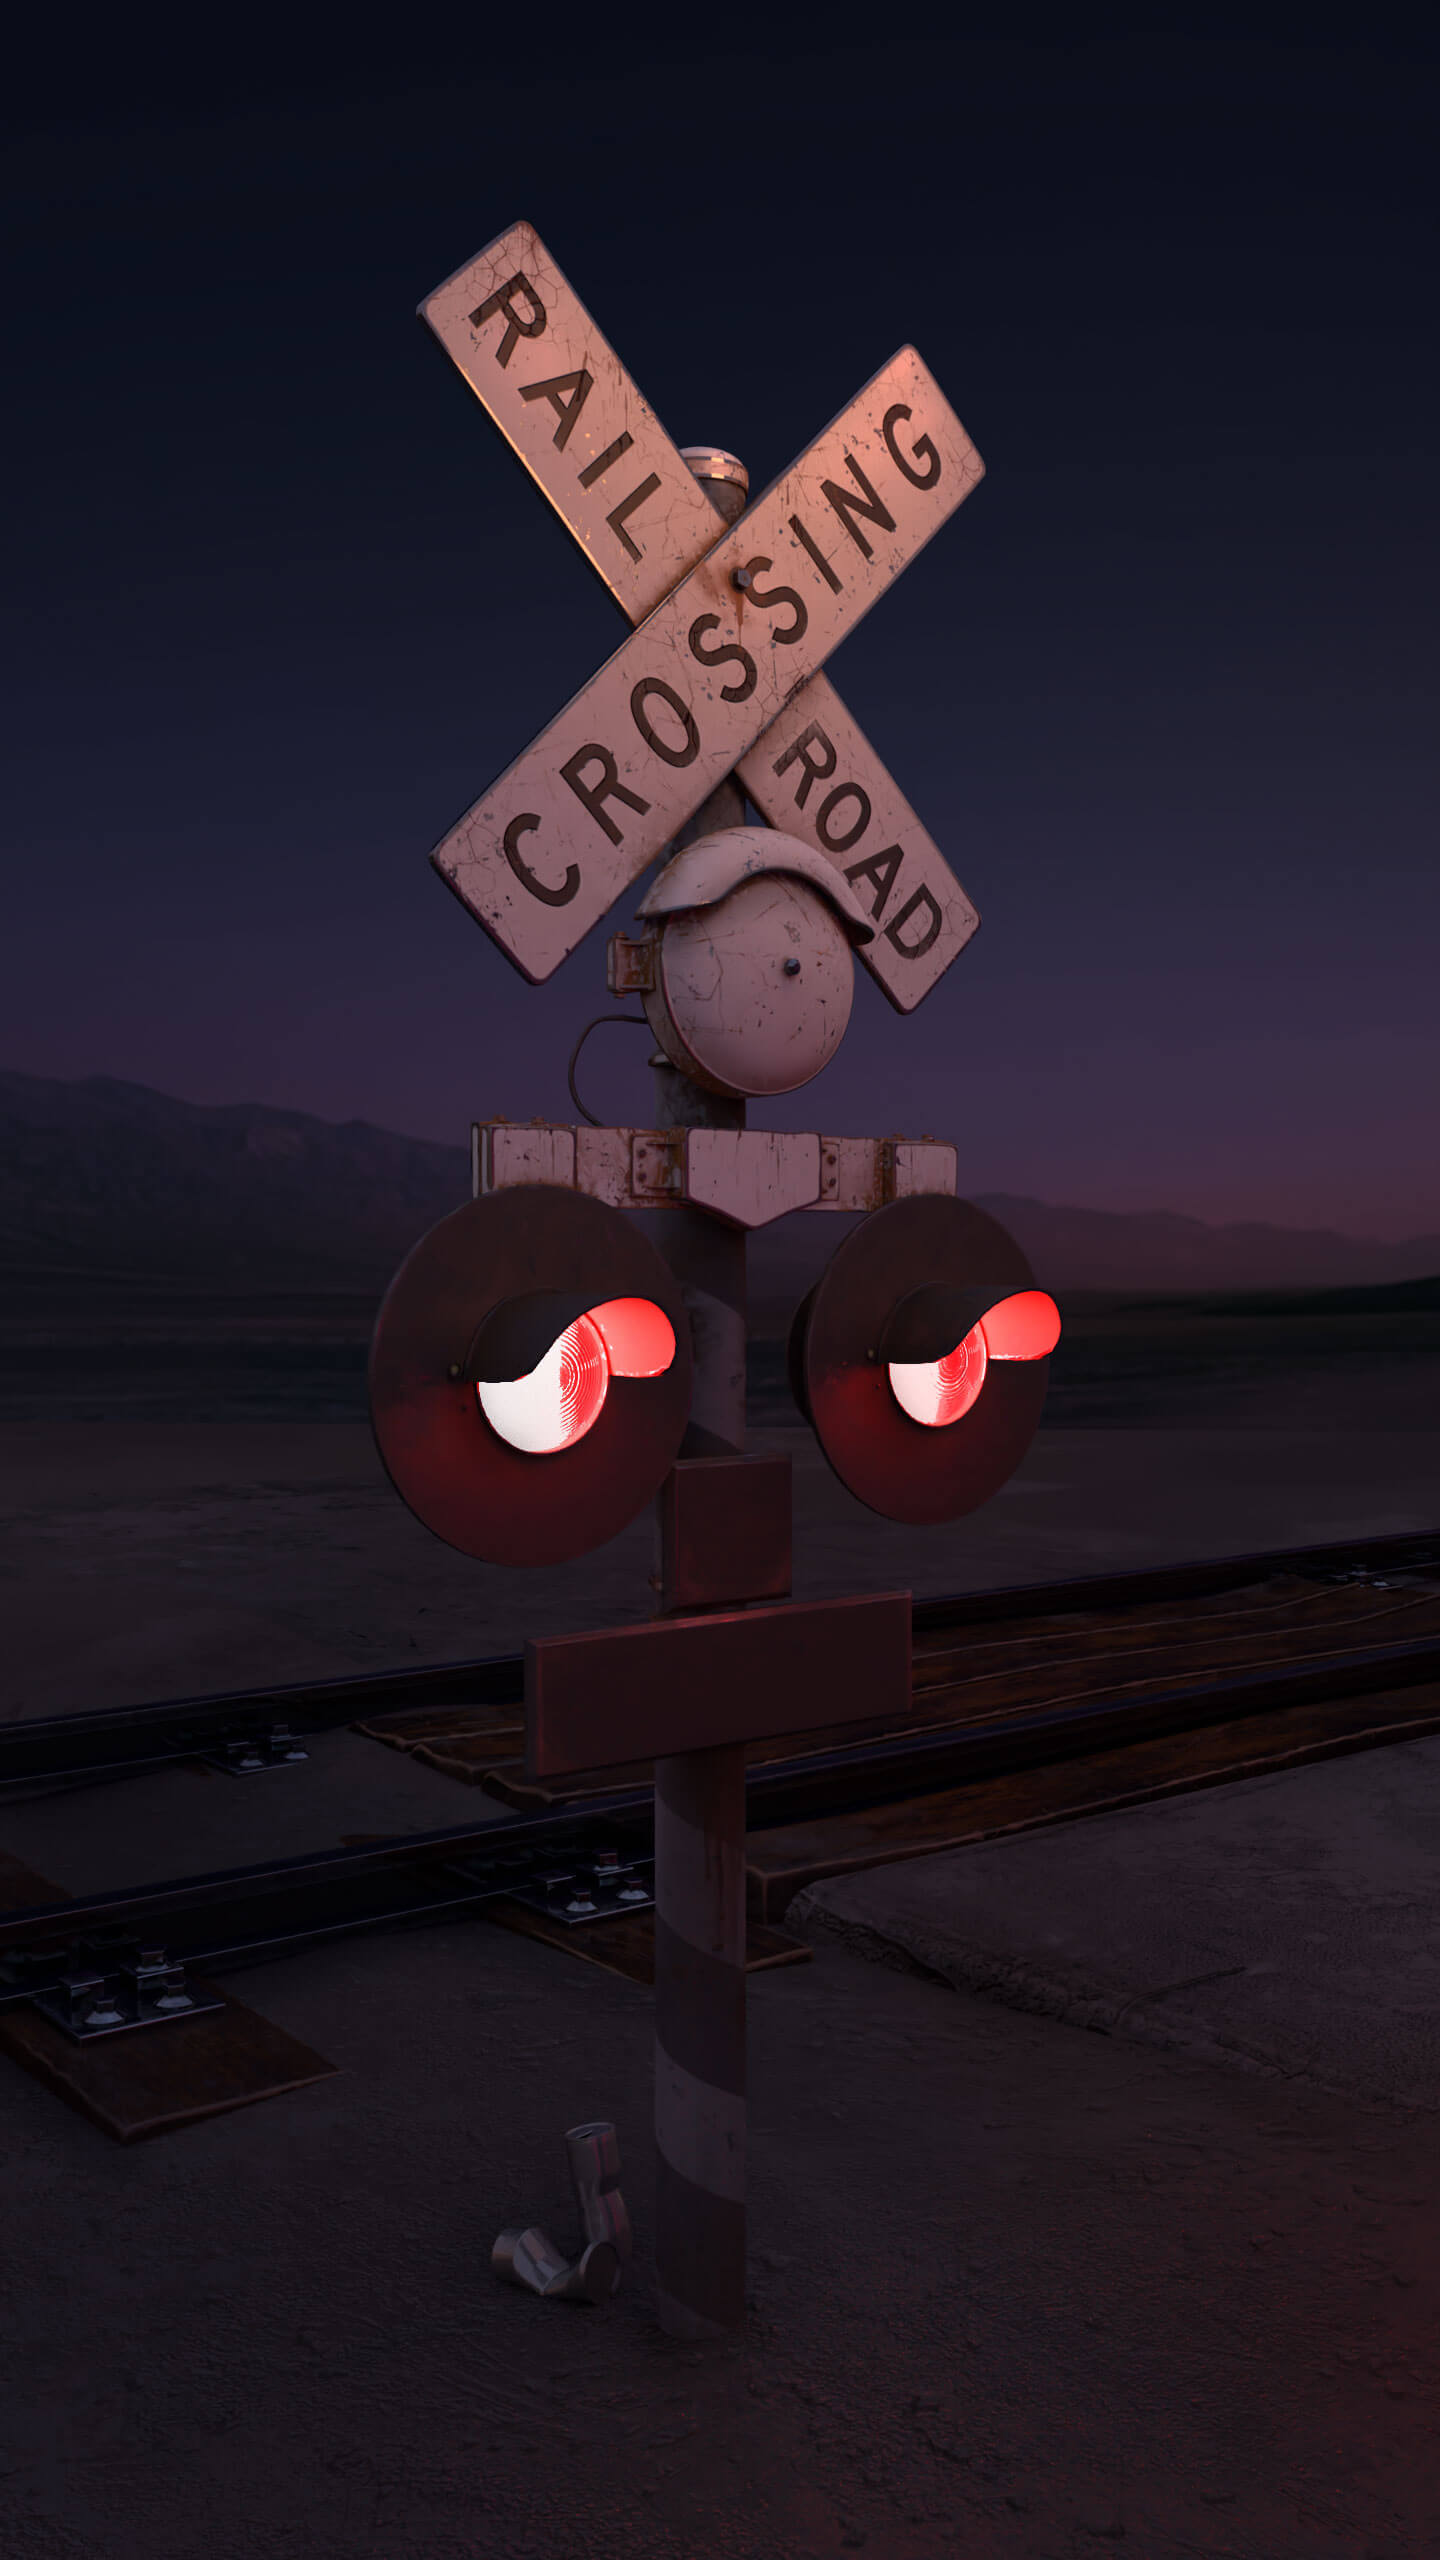 An illuminated railroad crossing sign in a flat, desert nightscape.